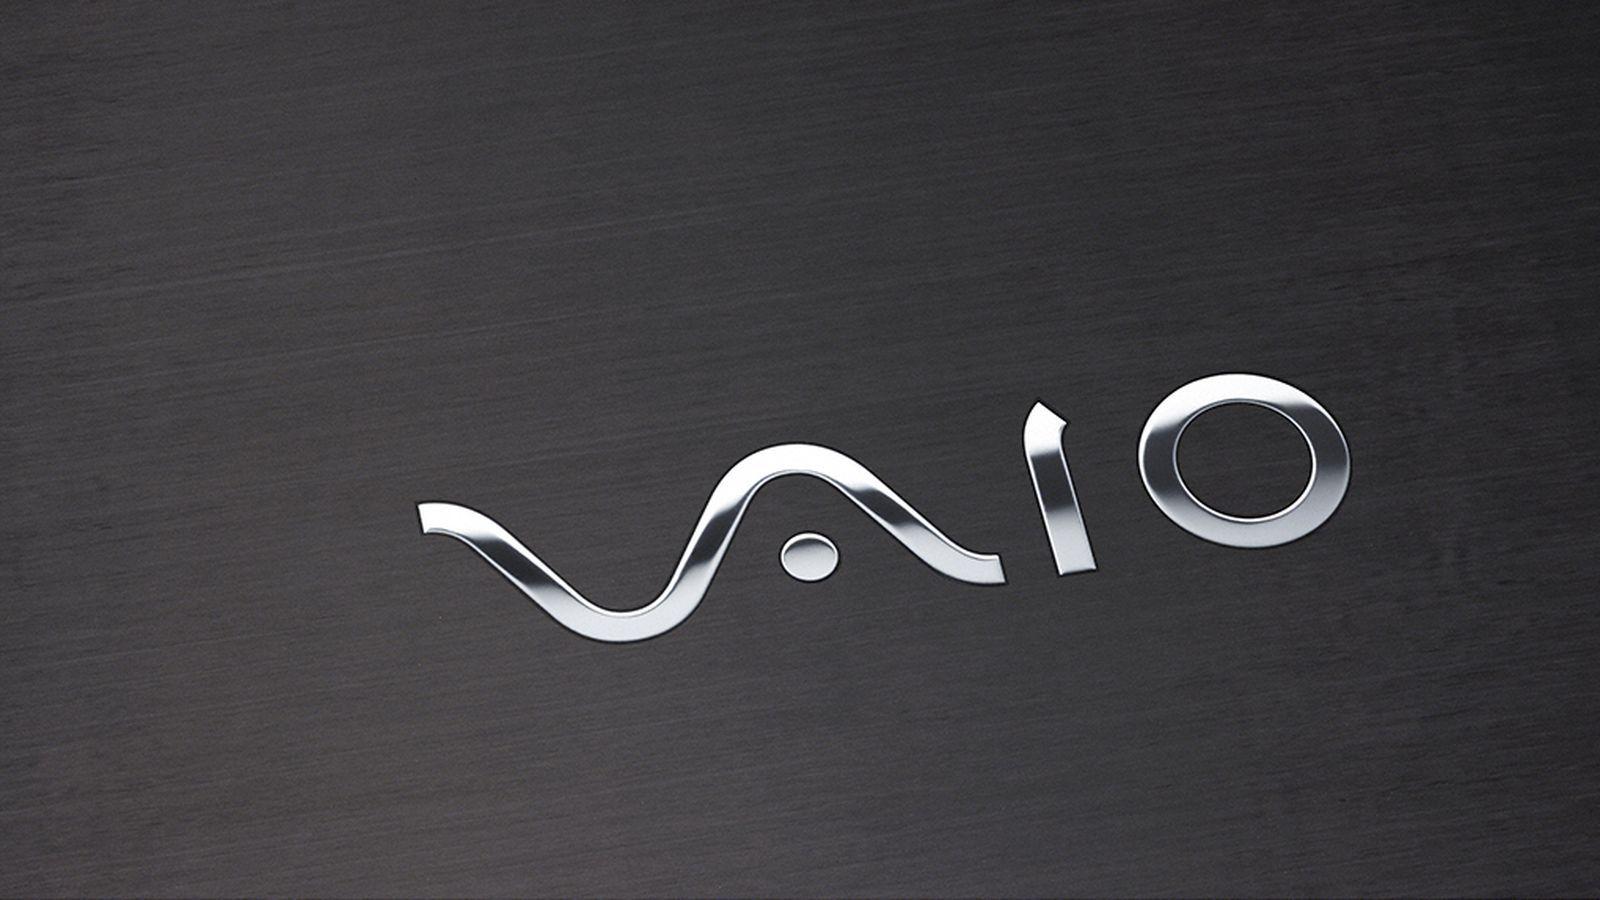 VAIO is coming back to